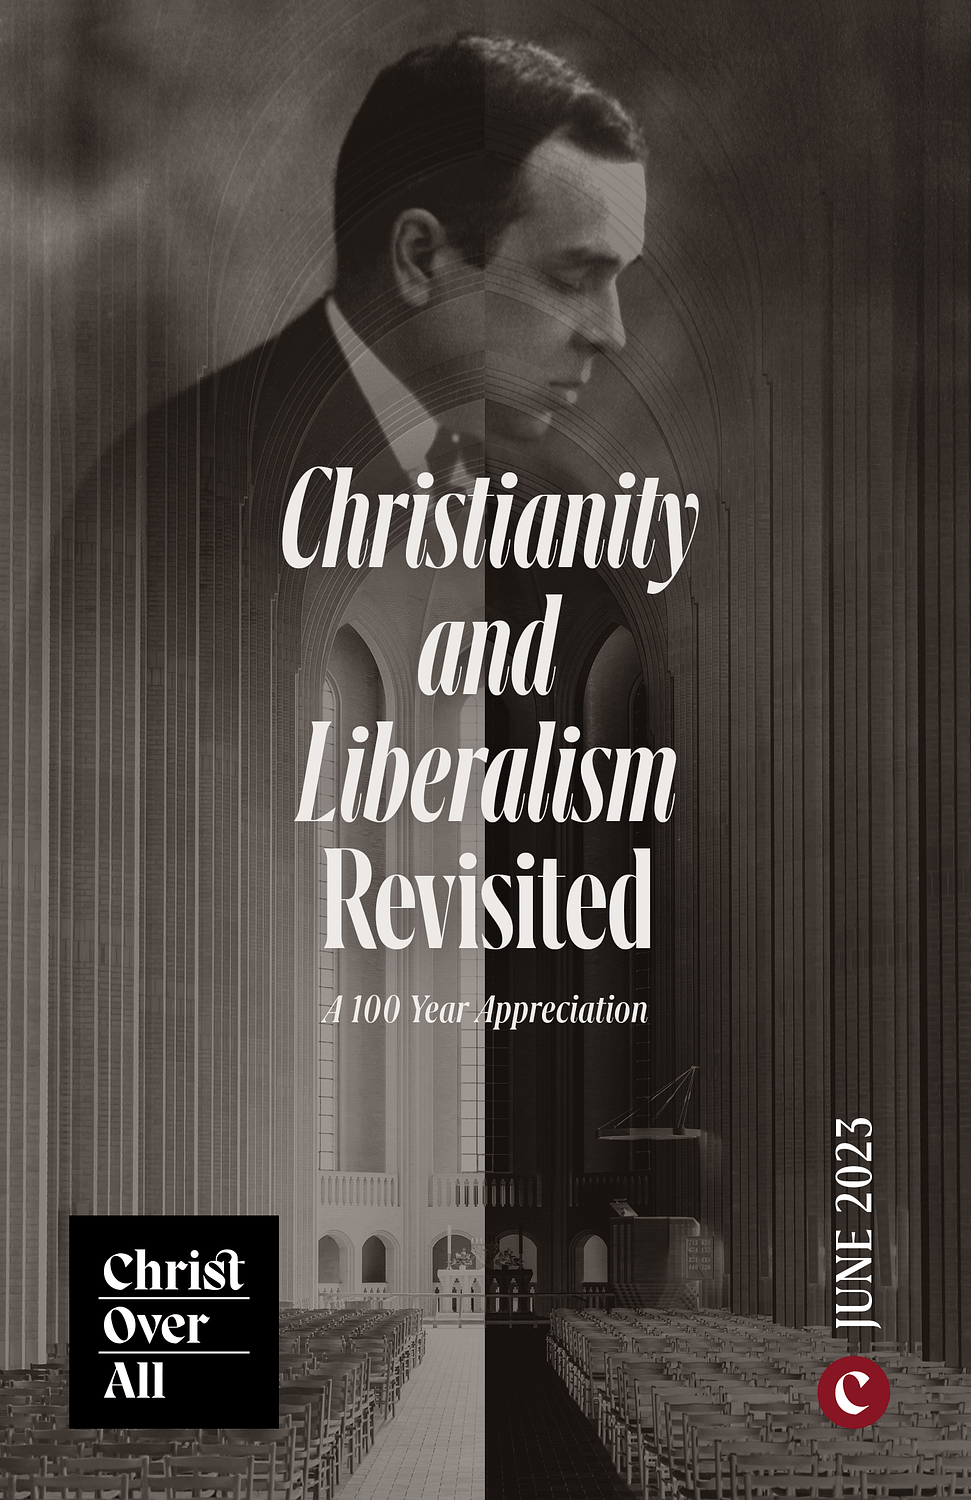 Macintosh HD:Users:kevinmcclure:Dropbox:Article Submissions:2023-06 June - Machen's Christianity and Liberalism (Due Apr 3rd):2023–06 Pictures for Resources:June 2023 – Machen's Christianity and Liberalism at 100 Years.png